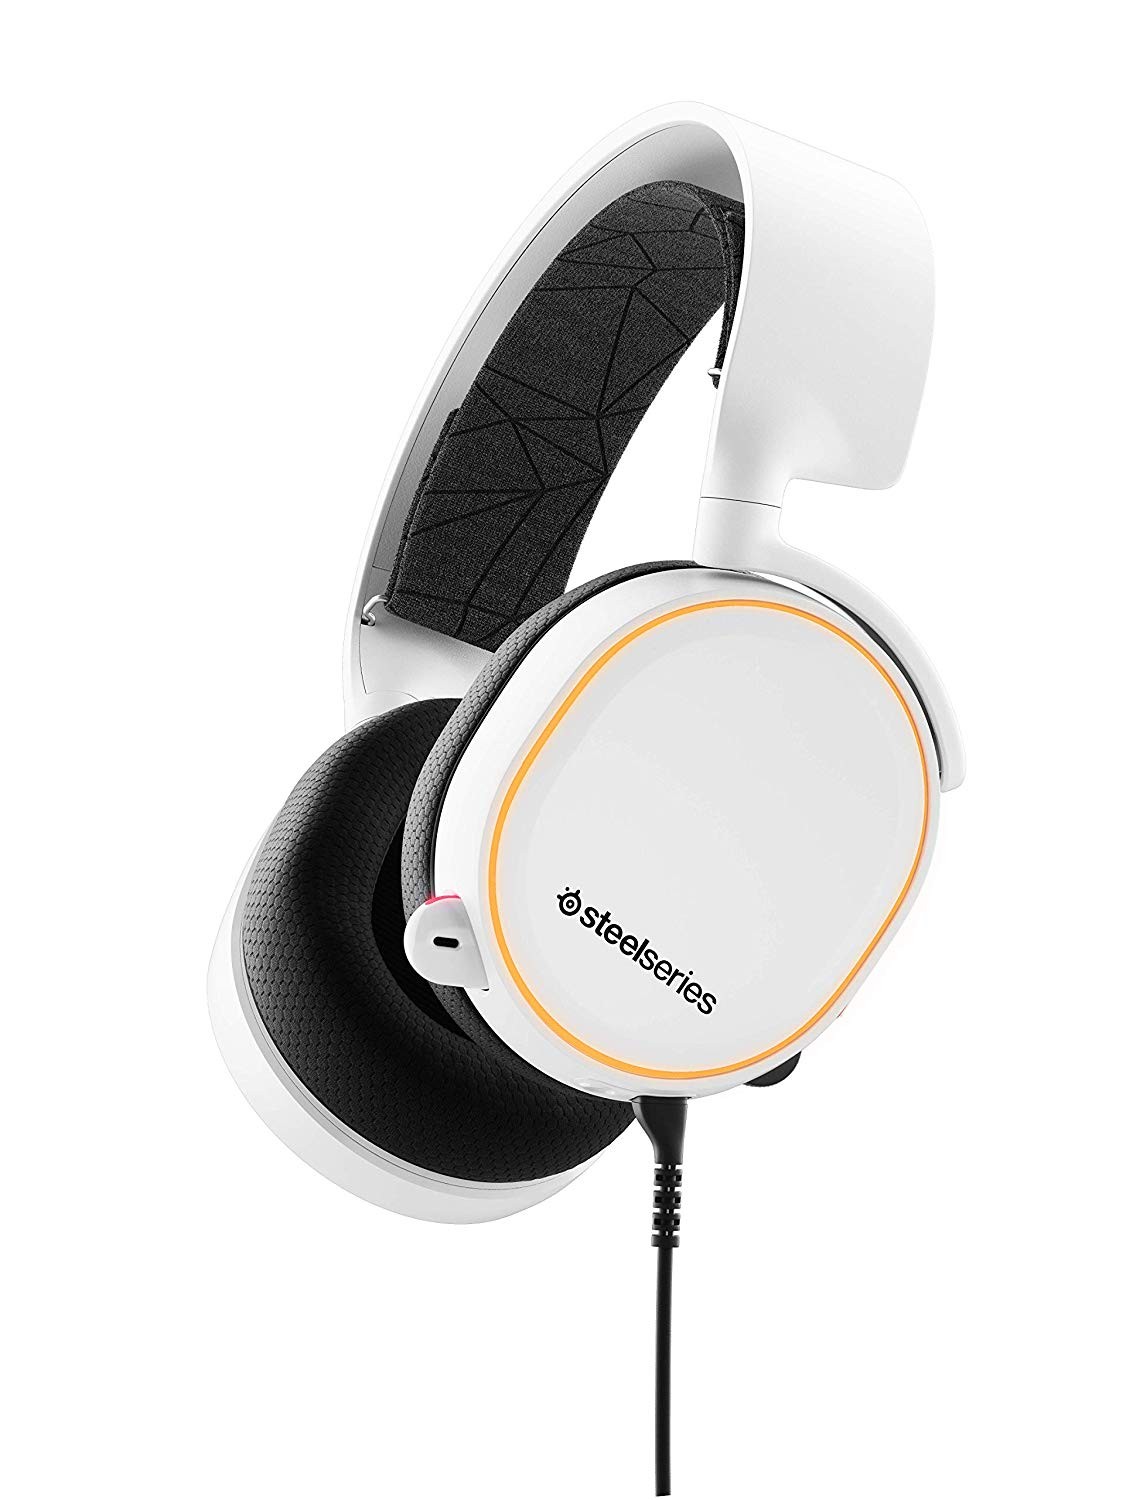 Steelseries Arctis 5 White (2019 Edition) gaming headset